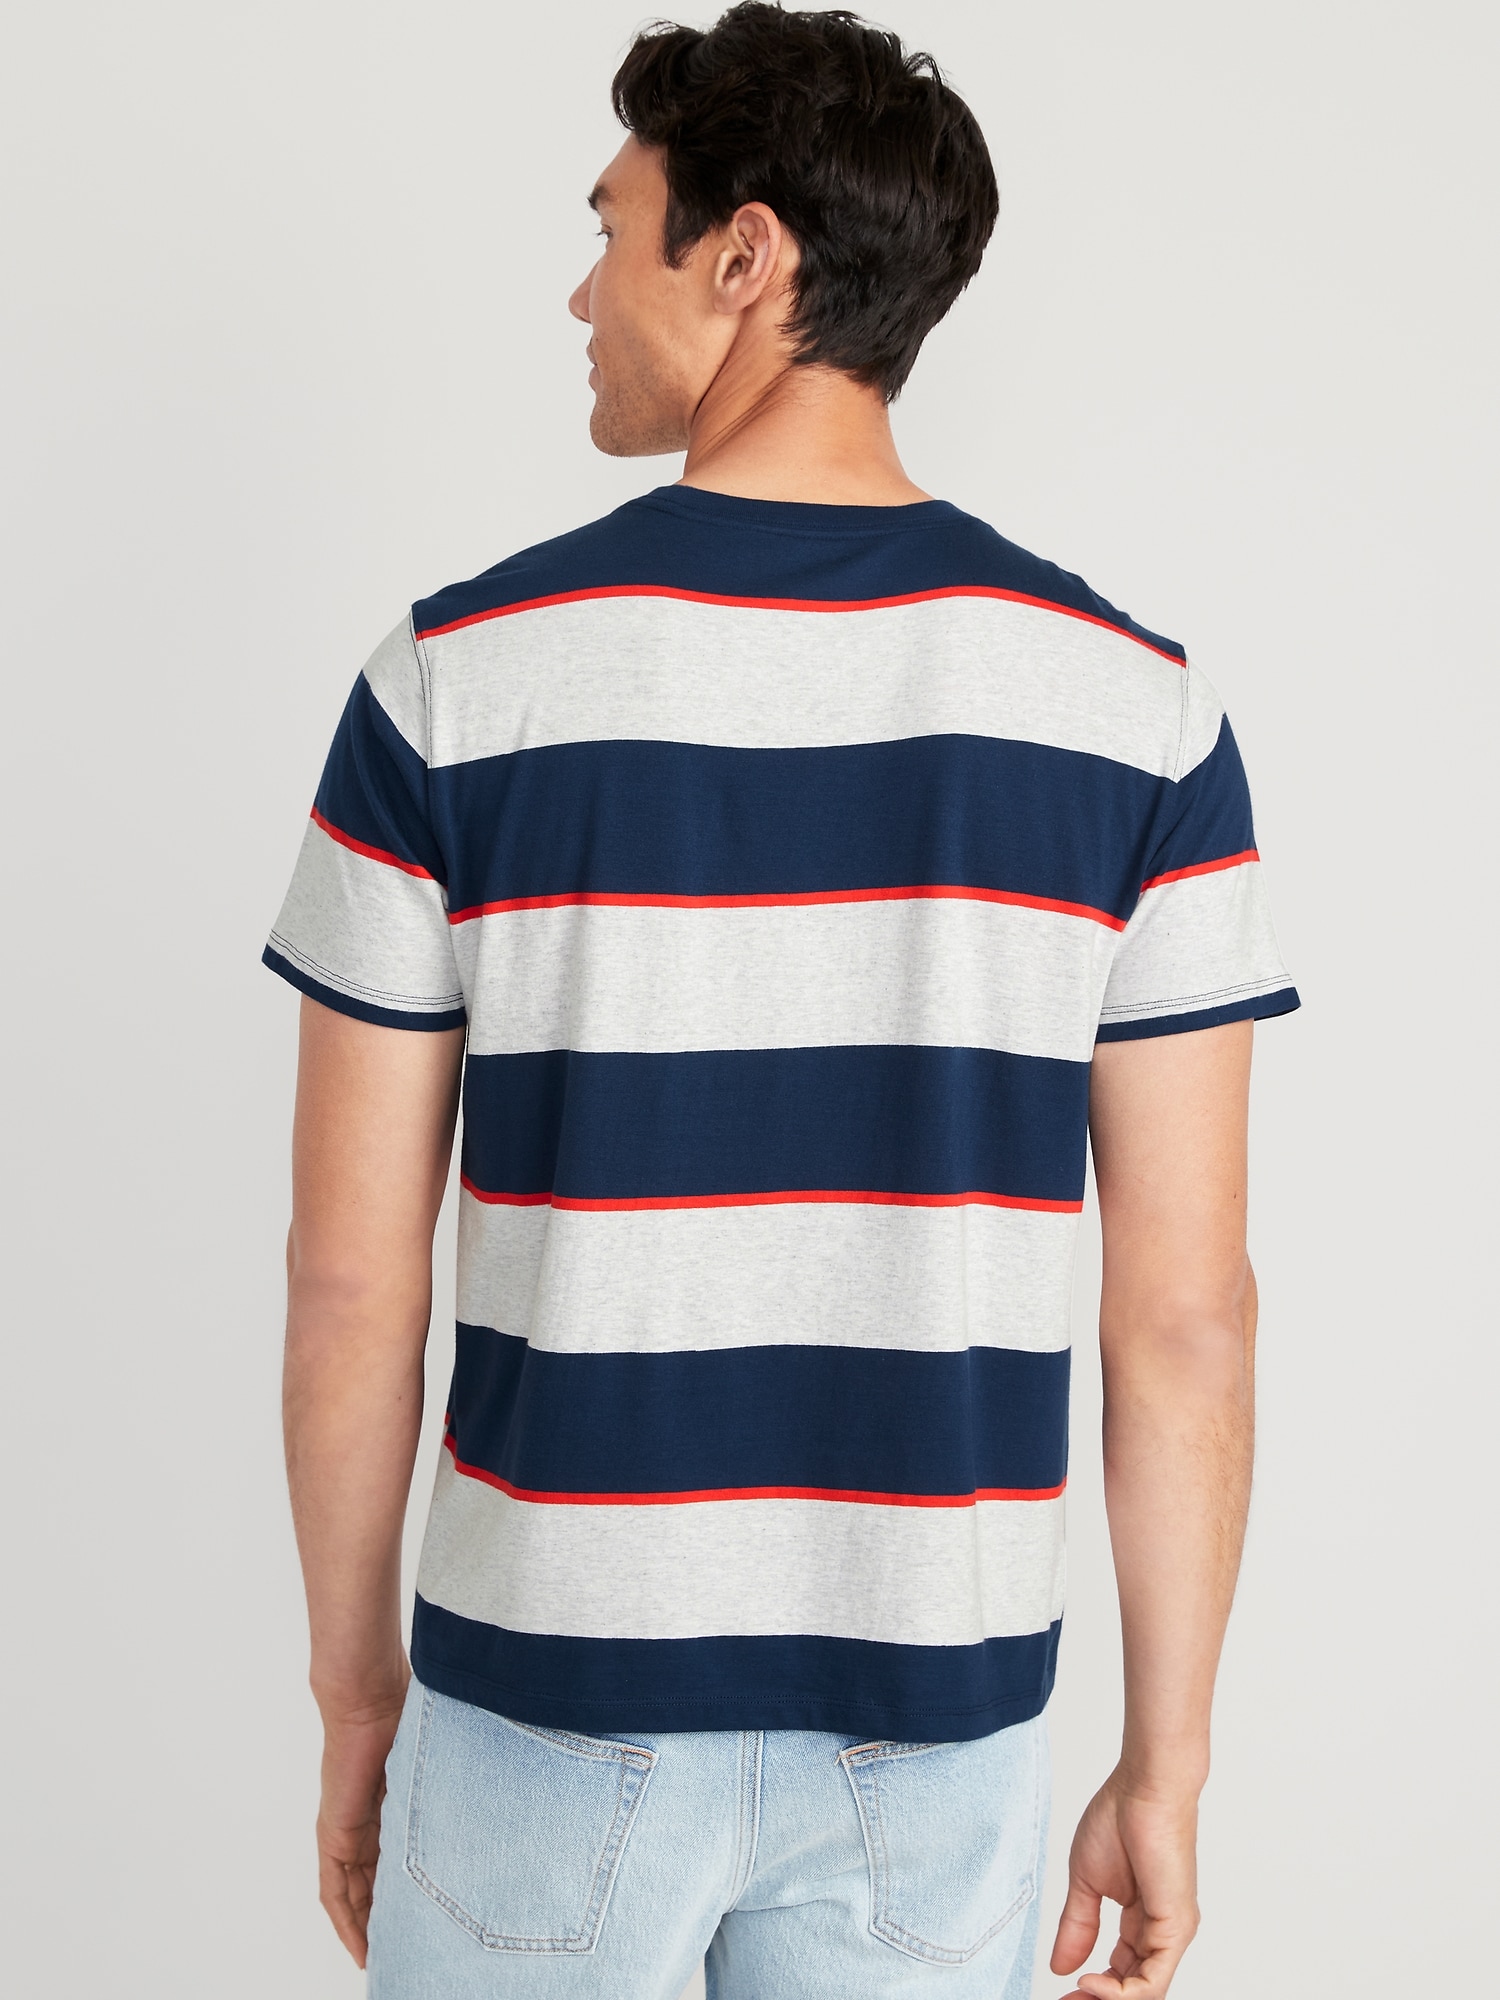 Soft-Washed Striped T-Shirt | Old Navy